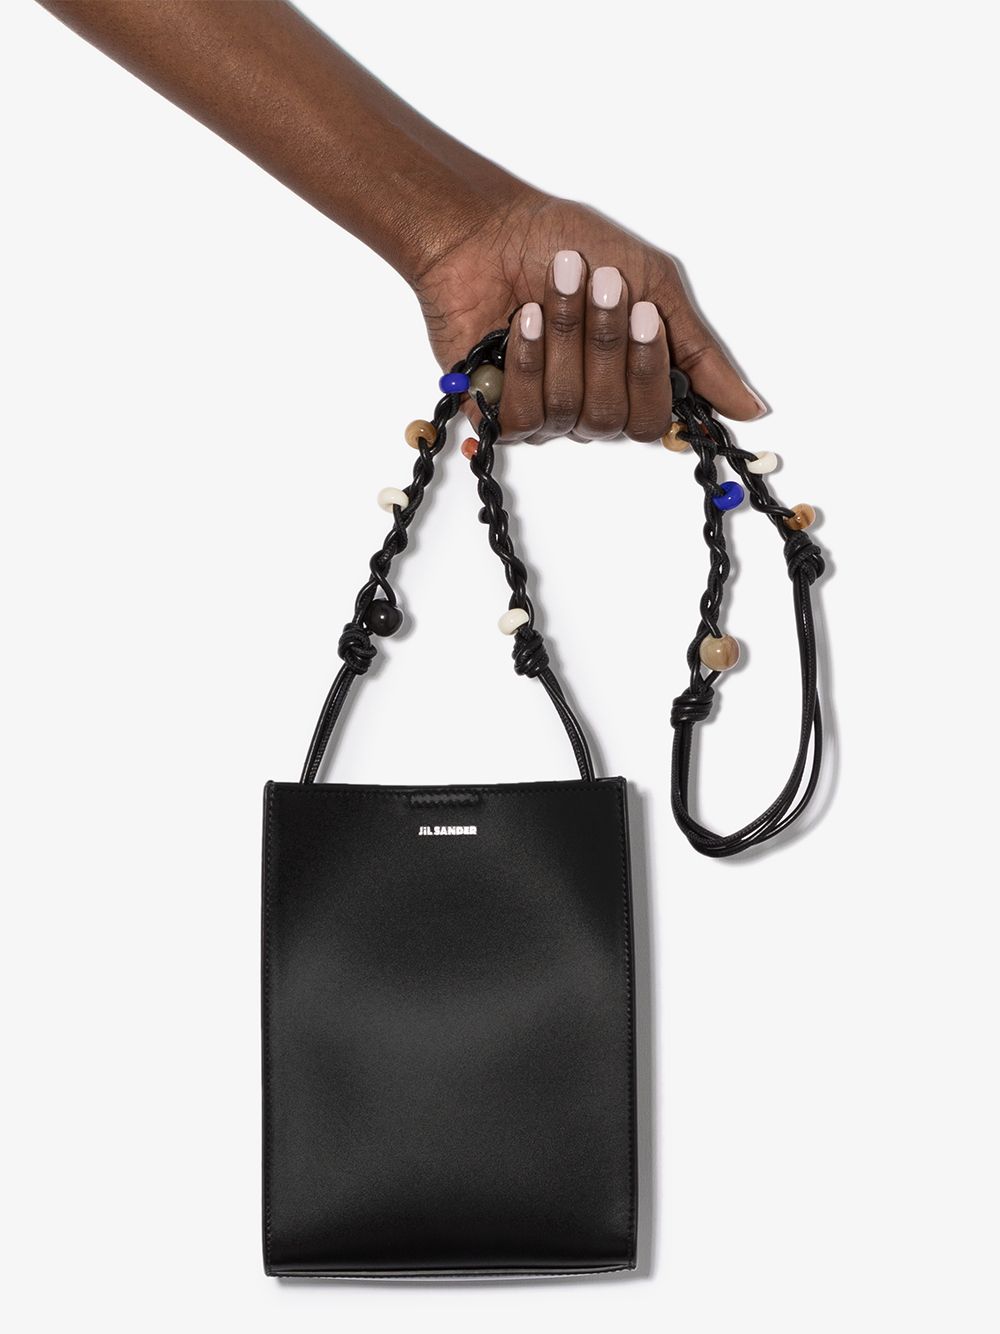 Jil Sander tangle small leather shoulder bag with beads